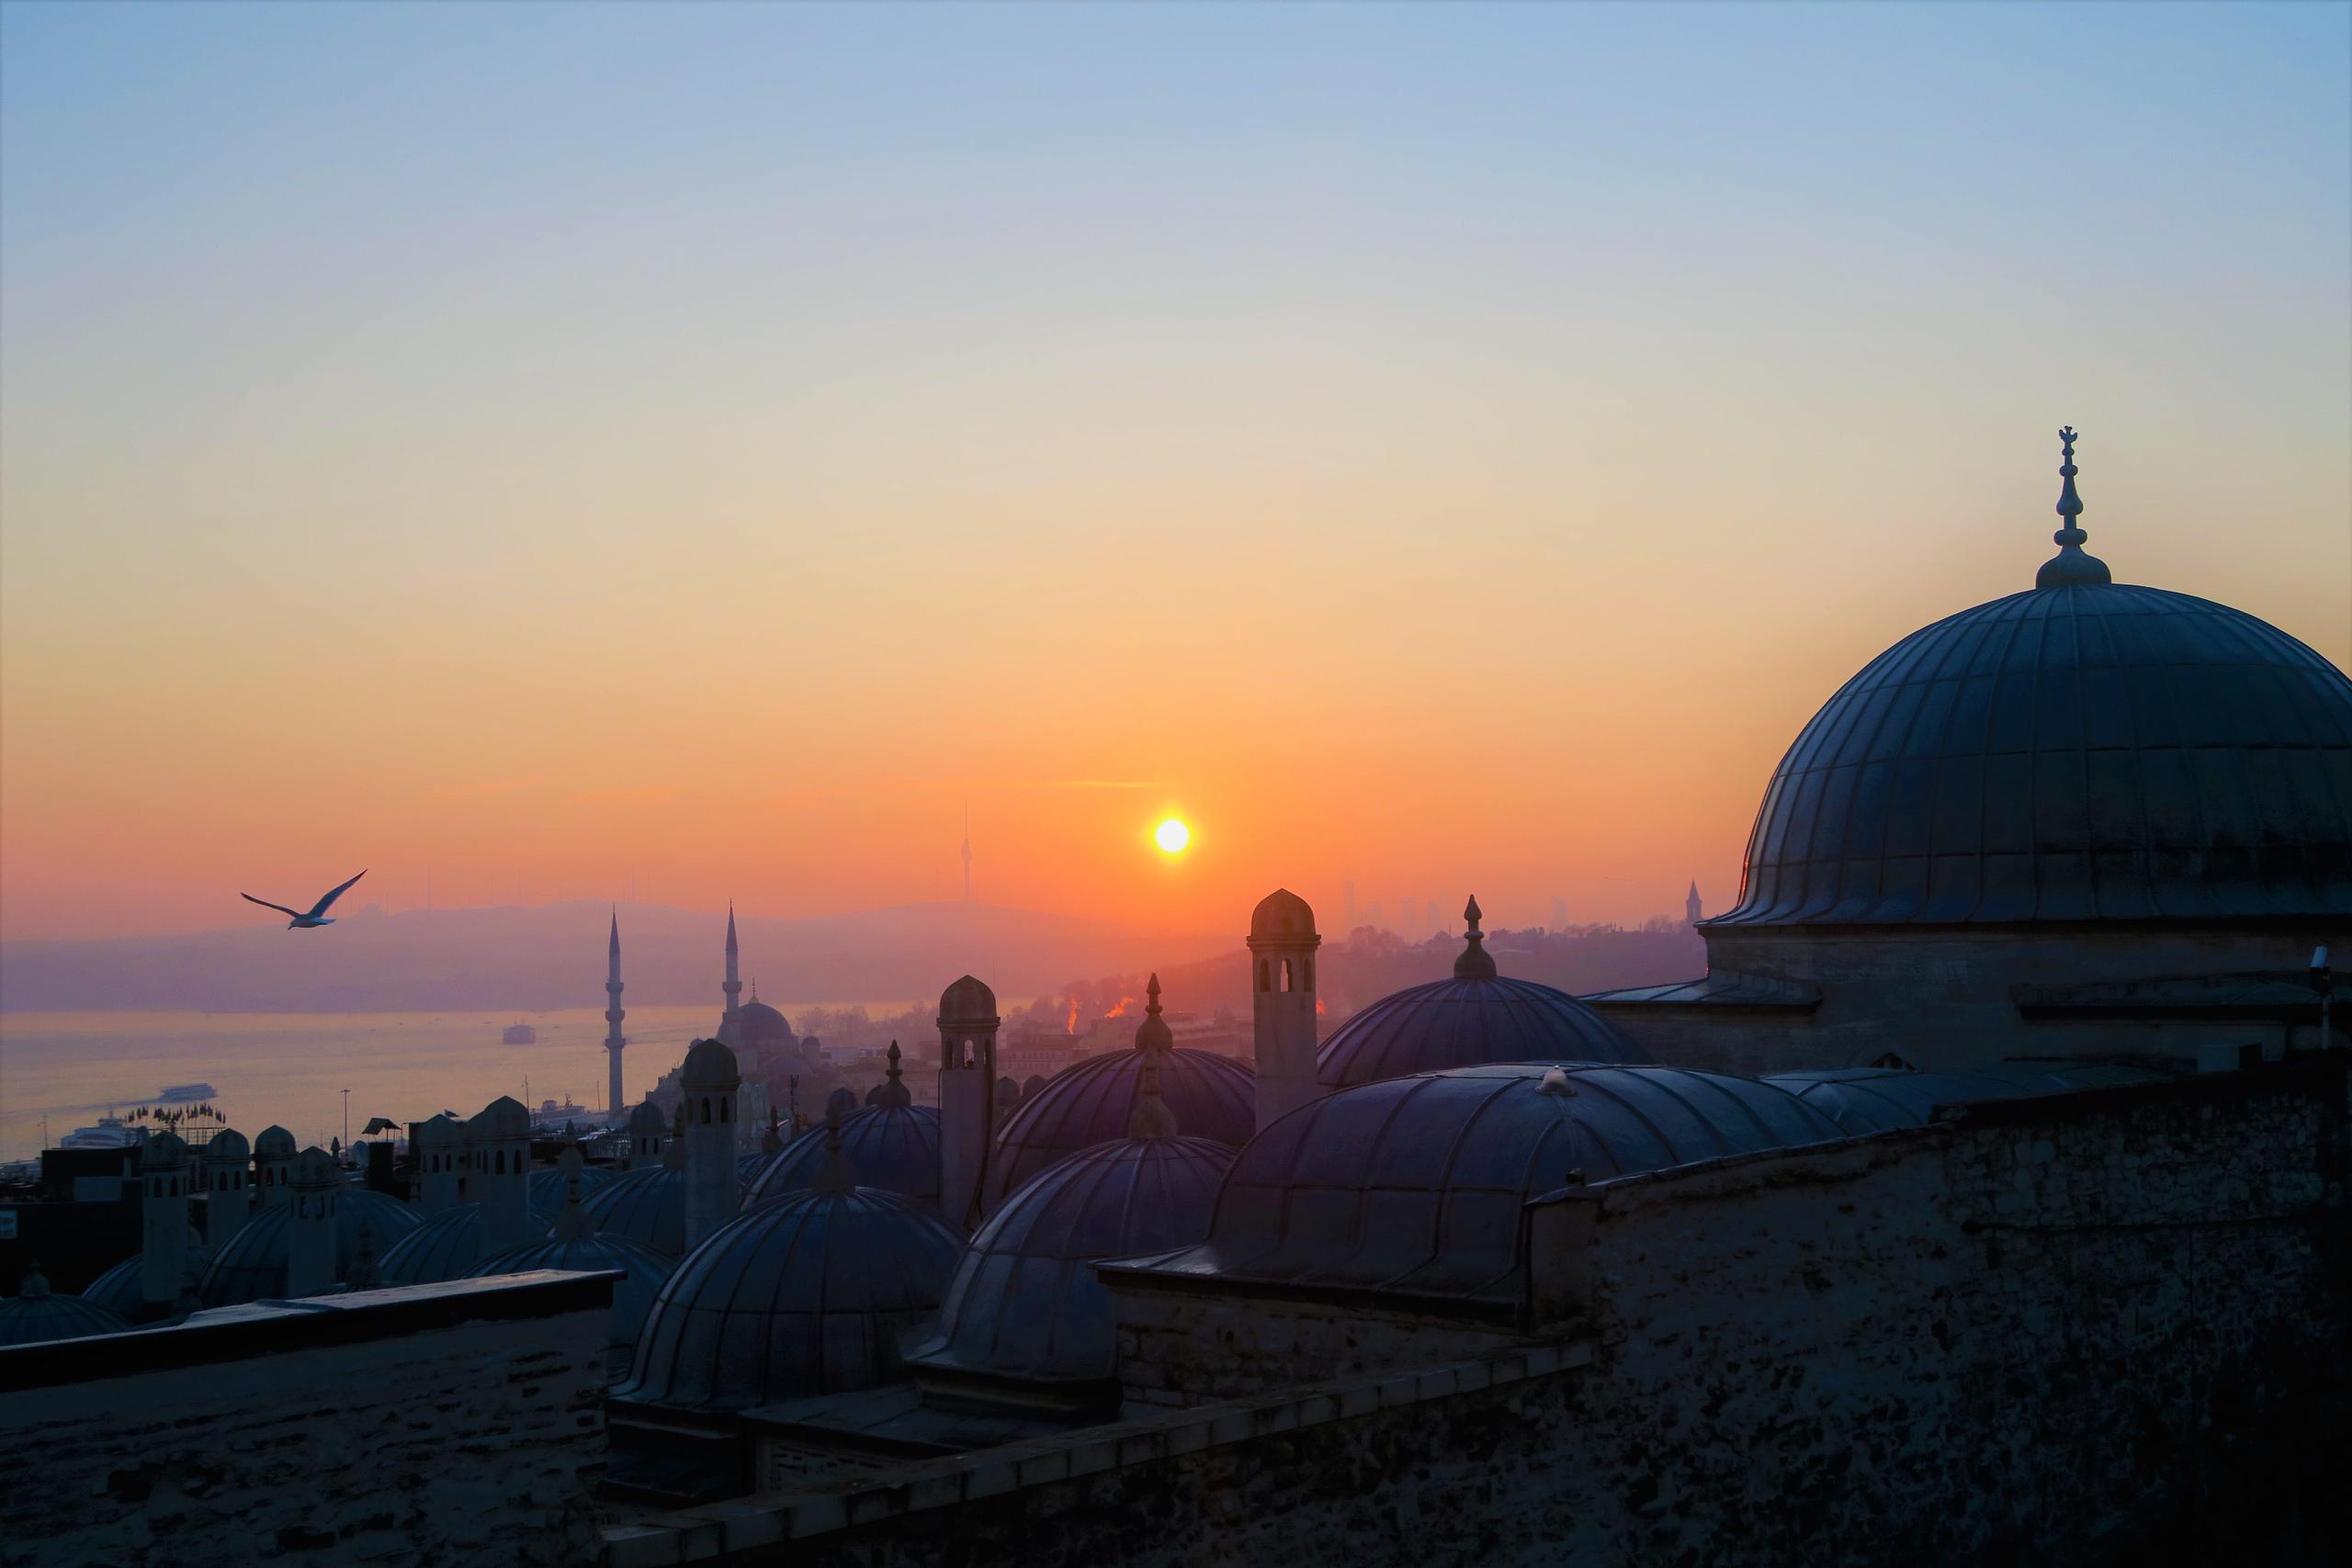 Sunset in Islamic country.